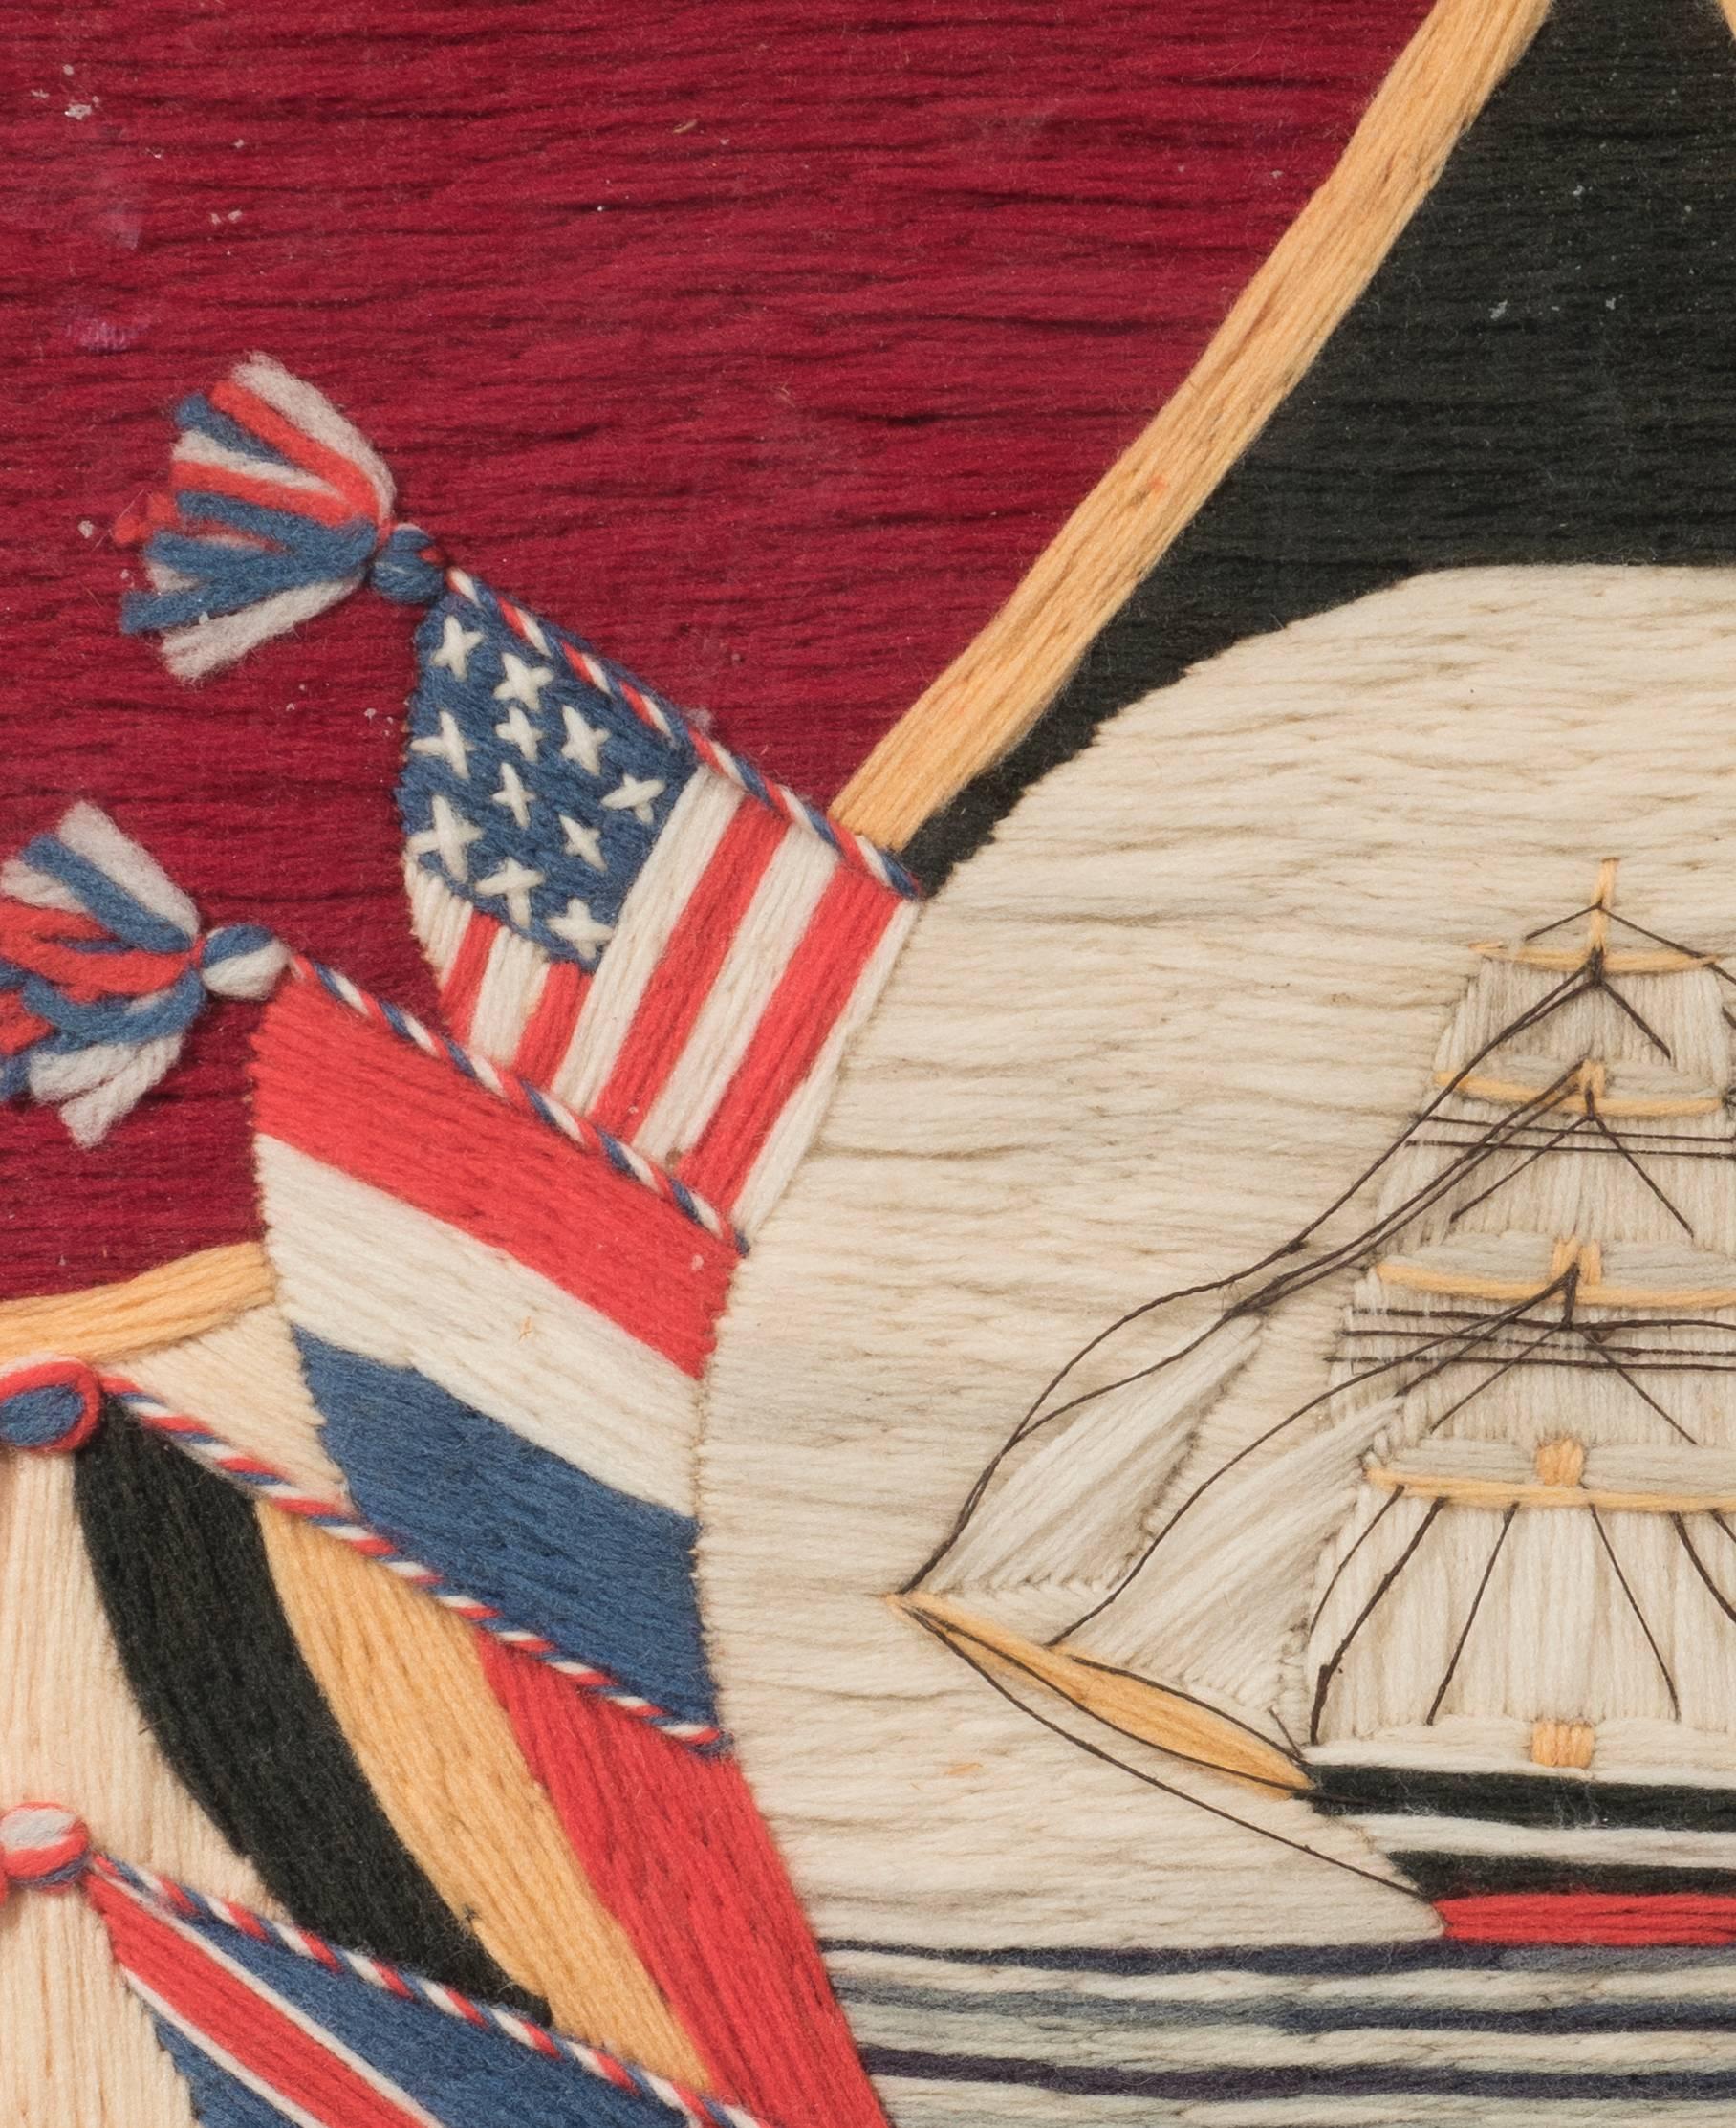 Worked in Woollen Threads featuring a masted British shop surrounding by draped flags. 

Mounted, glazed and framed

